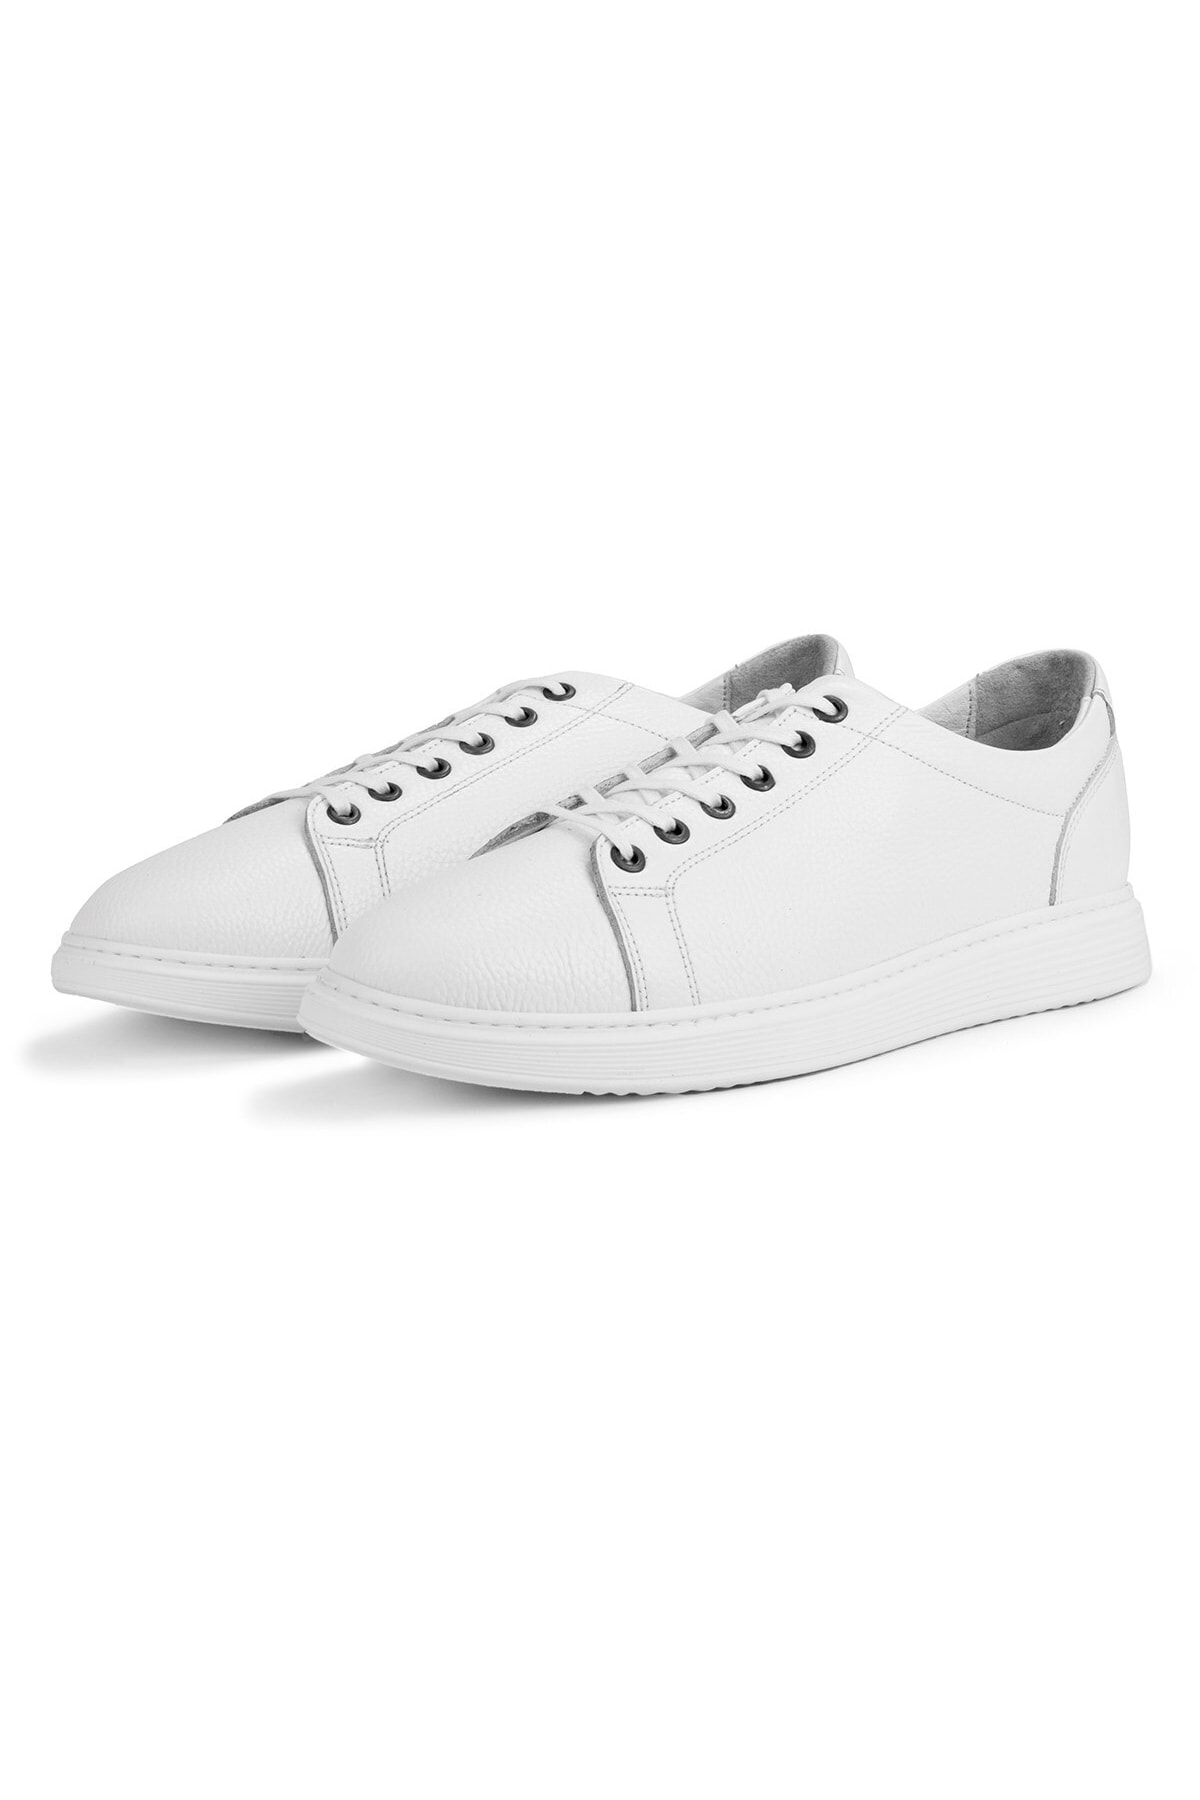 Levně Ducavelli Verano Genuine Leather Men's Casual Shoes, Summer Sports Shoes, Lightweight Shoes, White Leather Shoes.